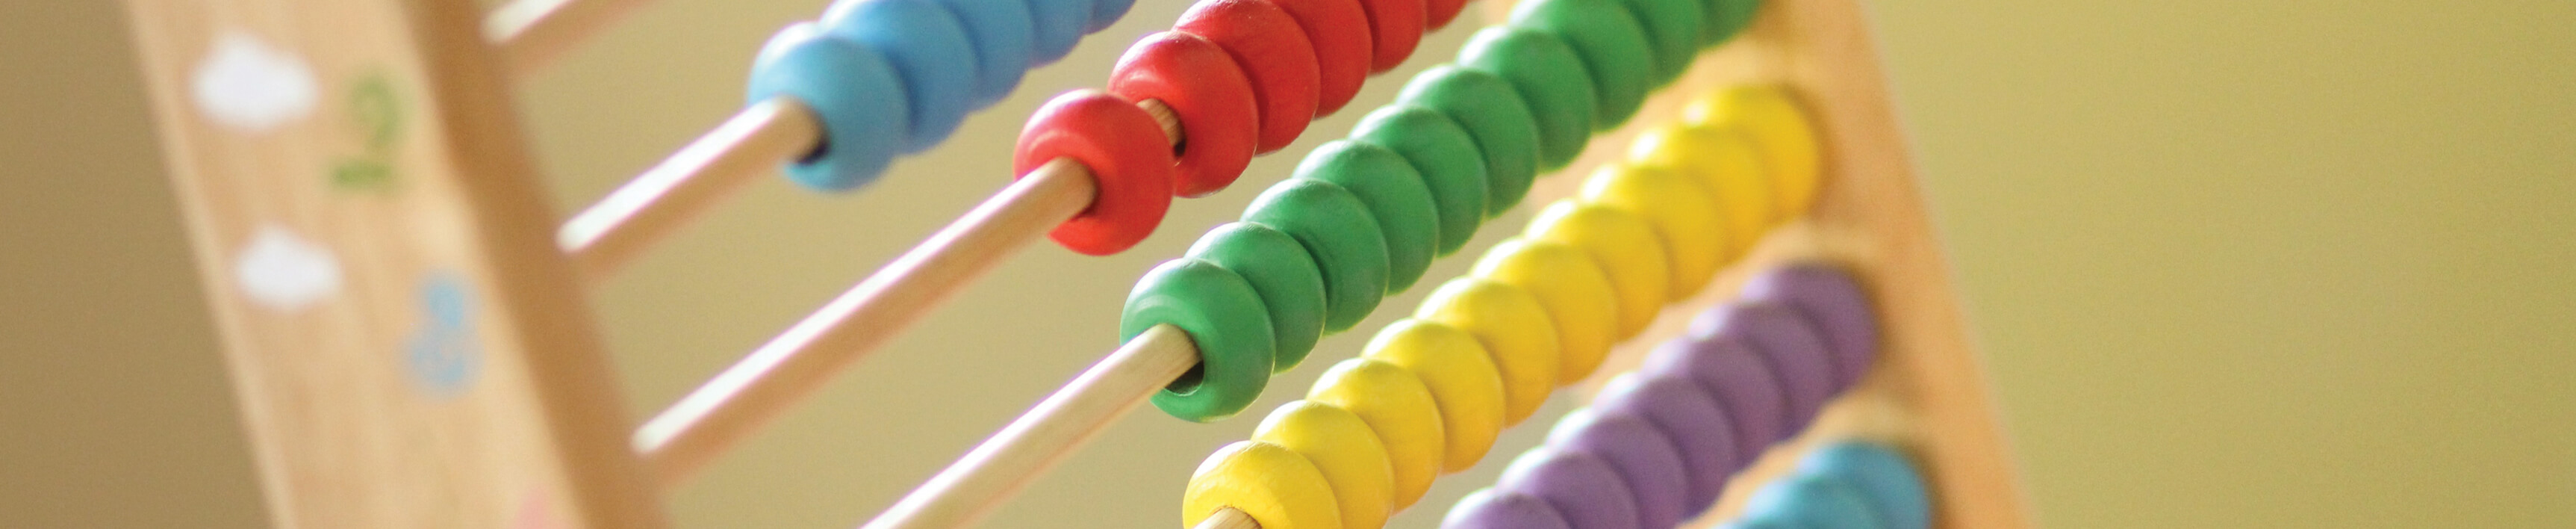 A wooden abacus with colored rows of beads